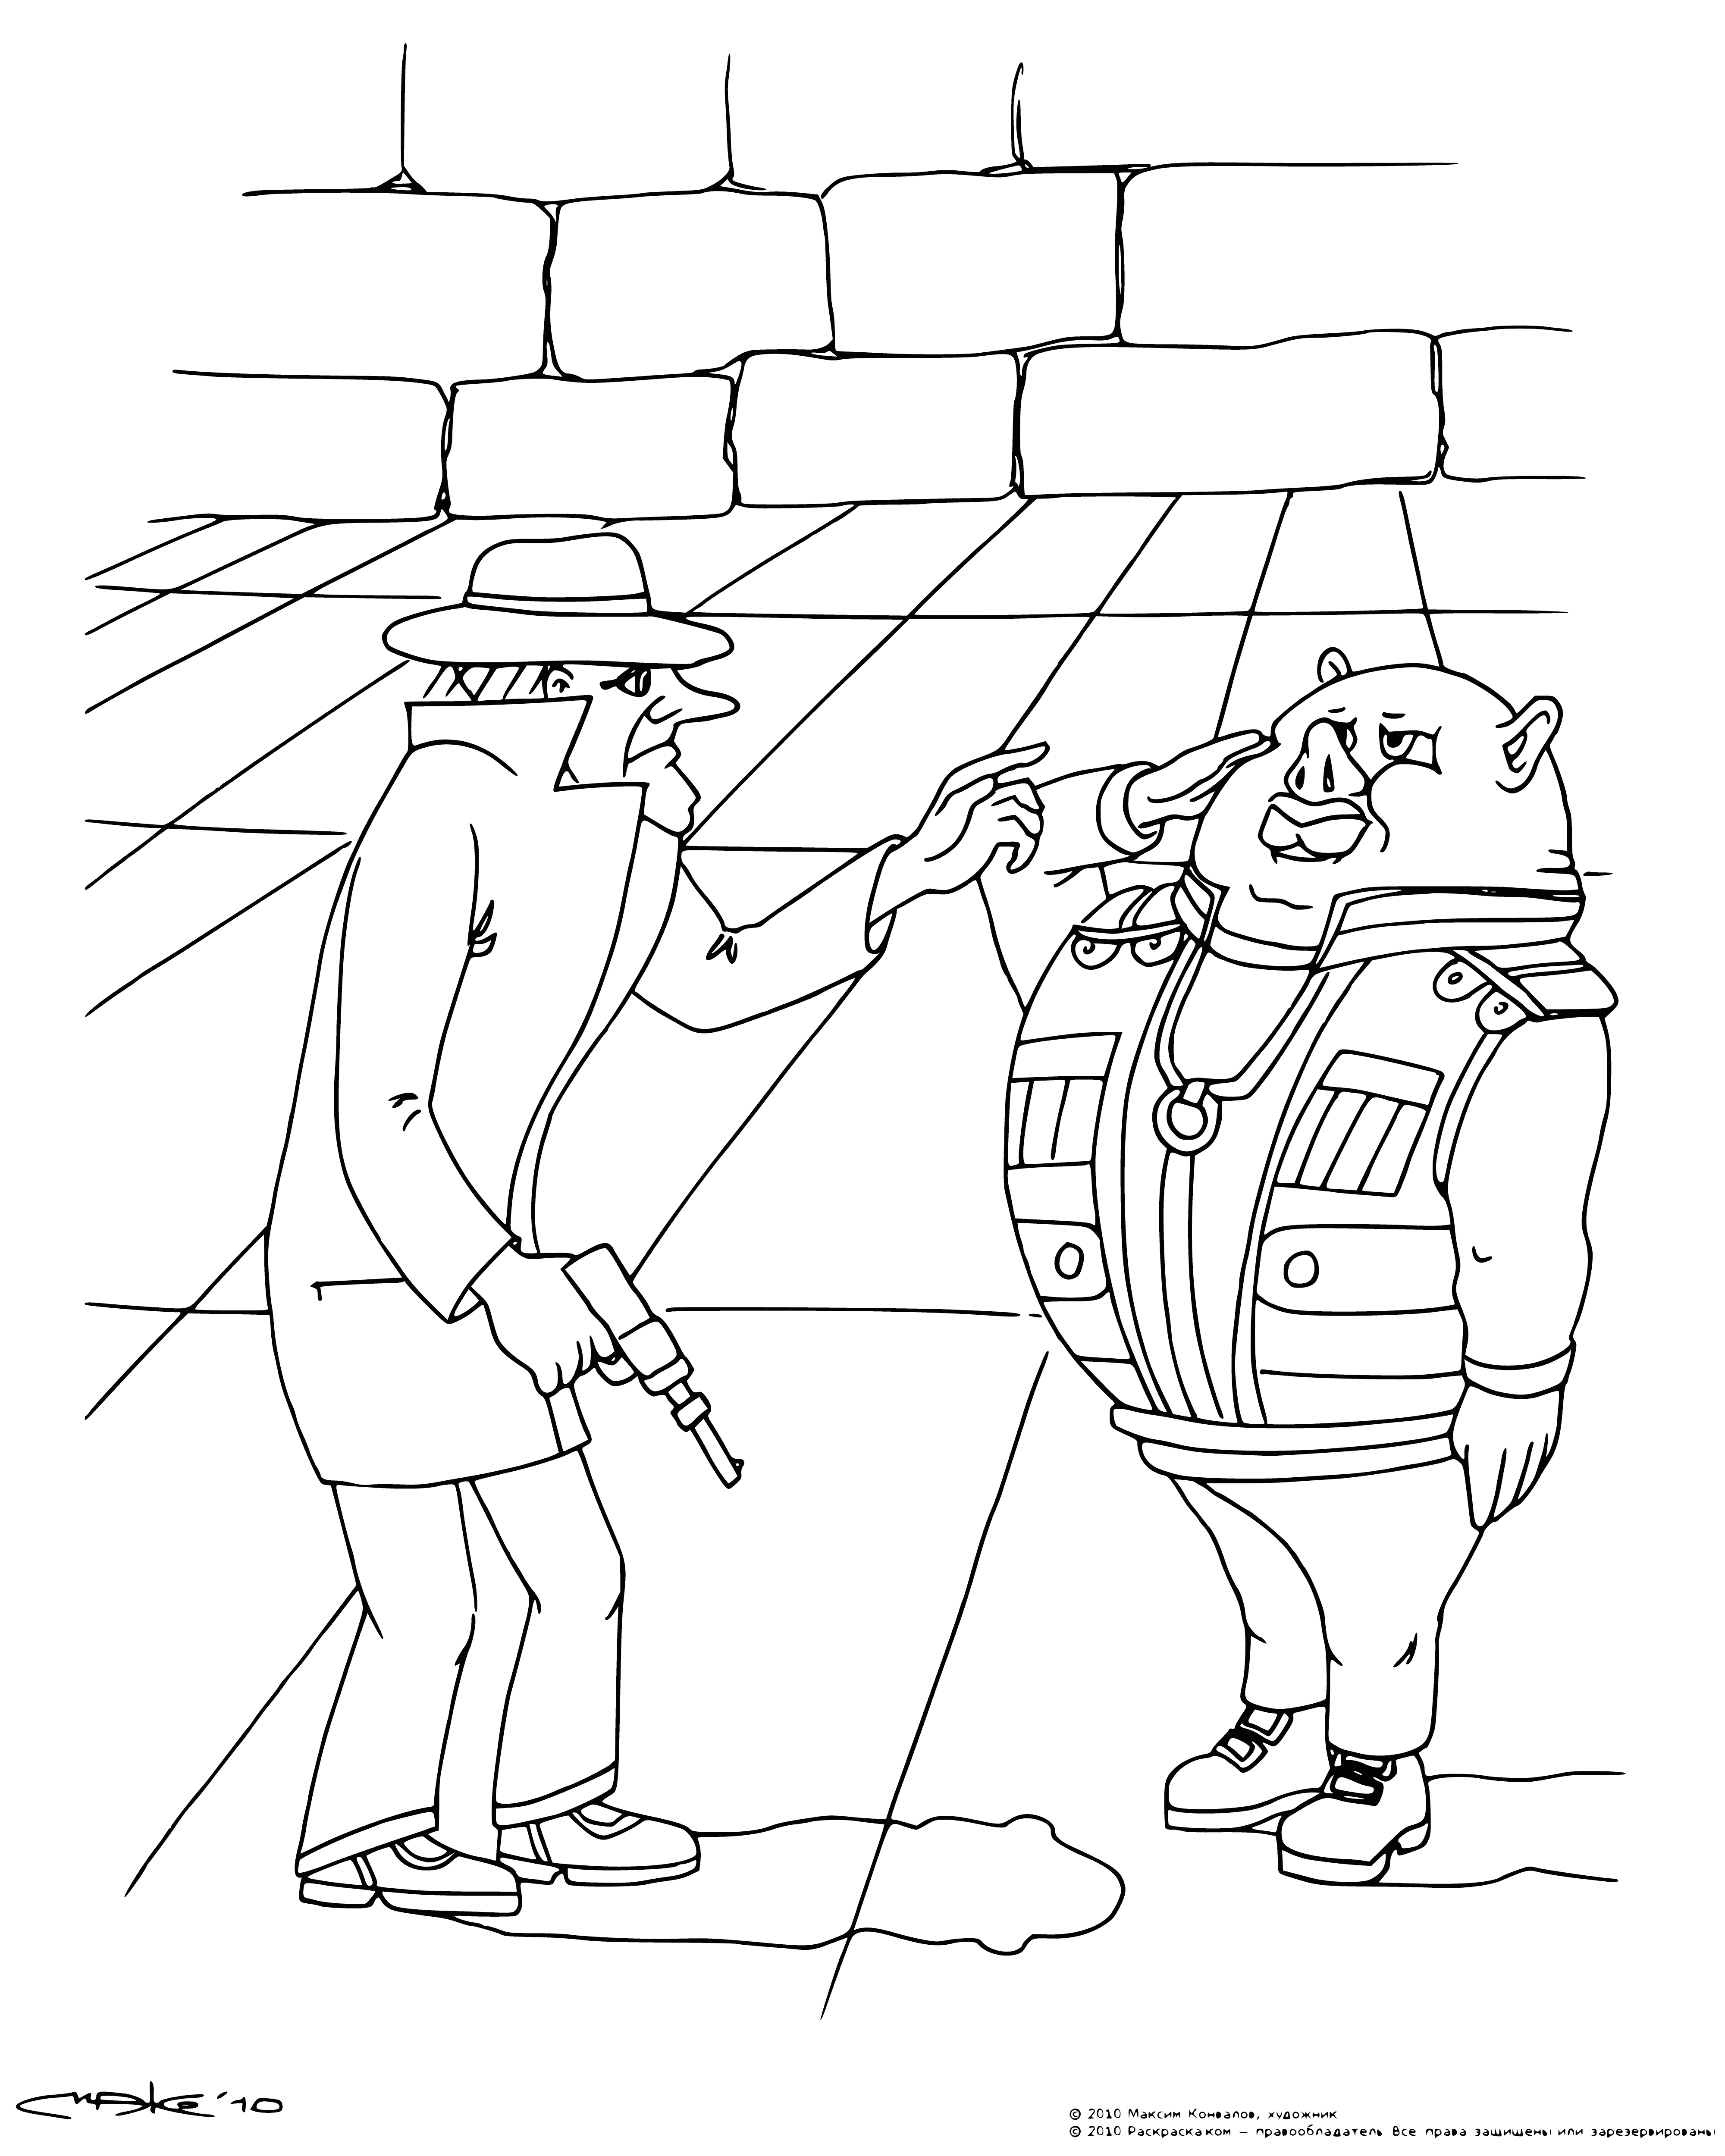 coloring page: Space pirates descend an imposing spaceship in eerie glow, prepared to raid a small, domed structure on the planet below.